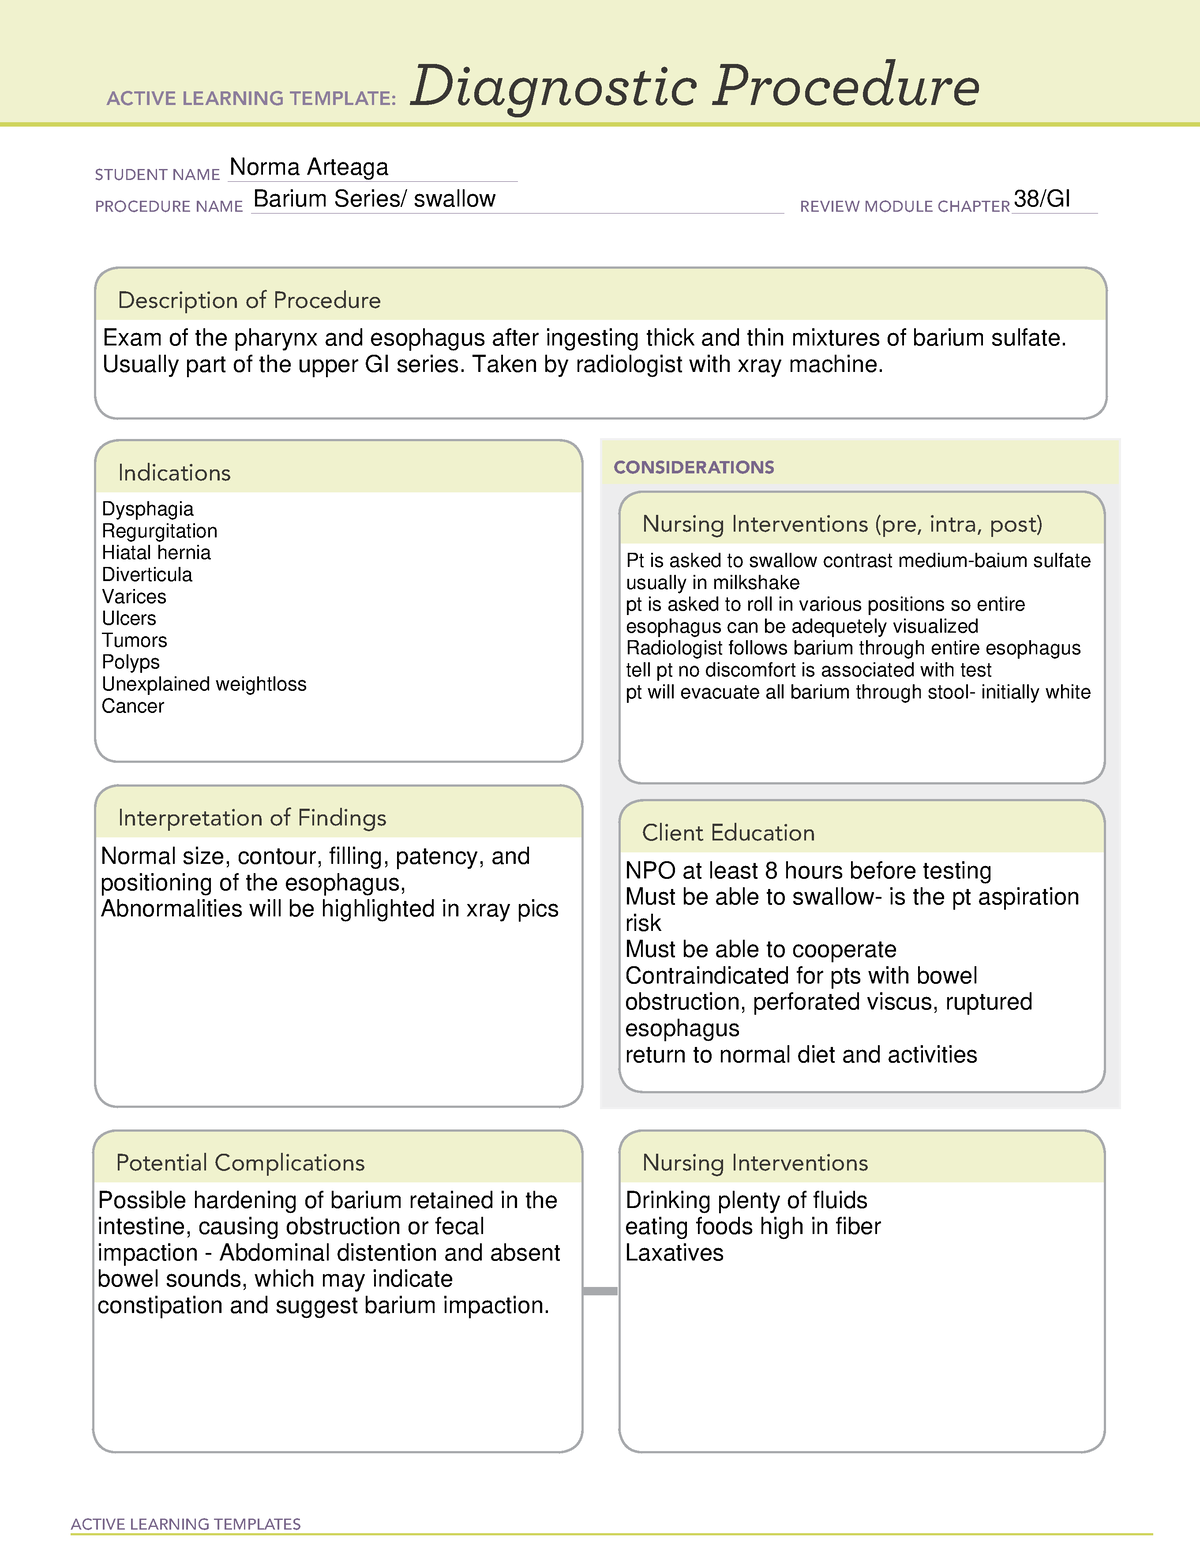 Barium swallow active learning template ACTIVE LEARNING TEMPLATES